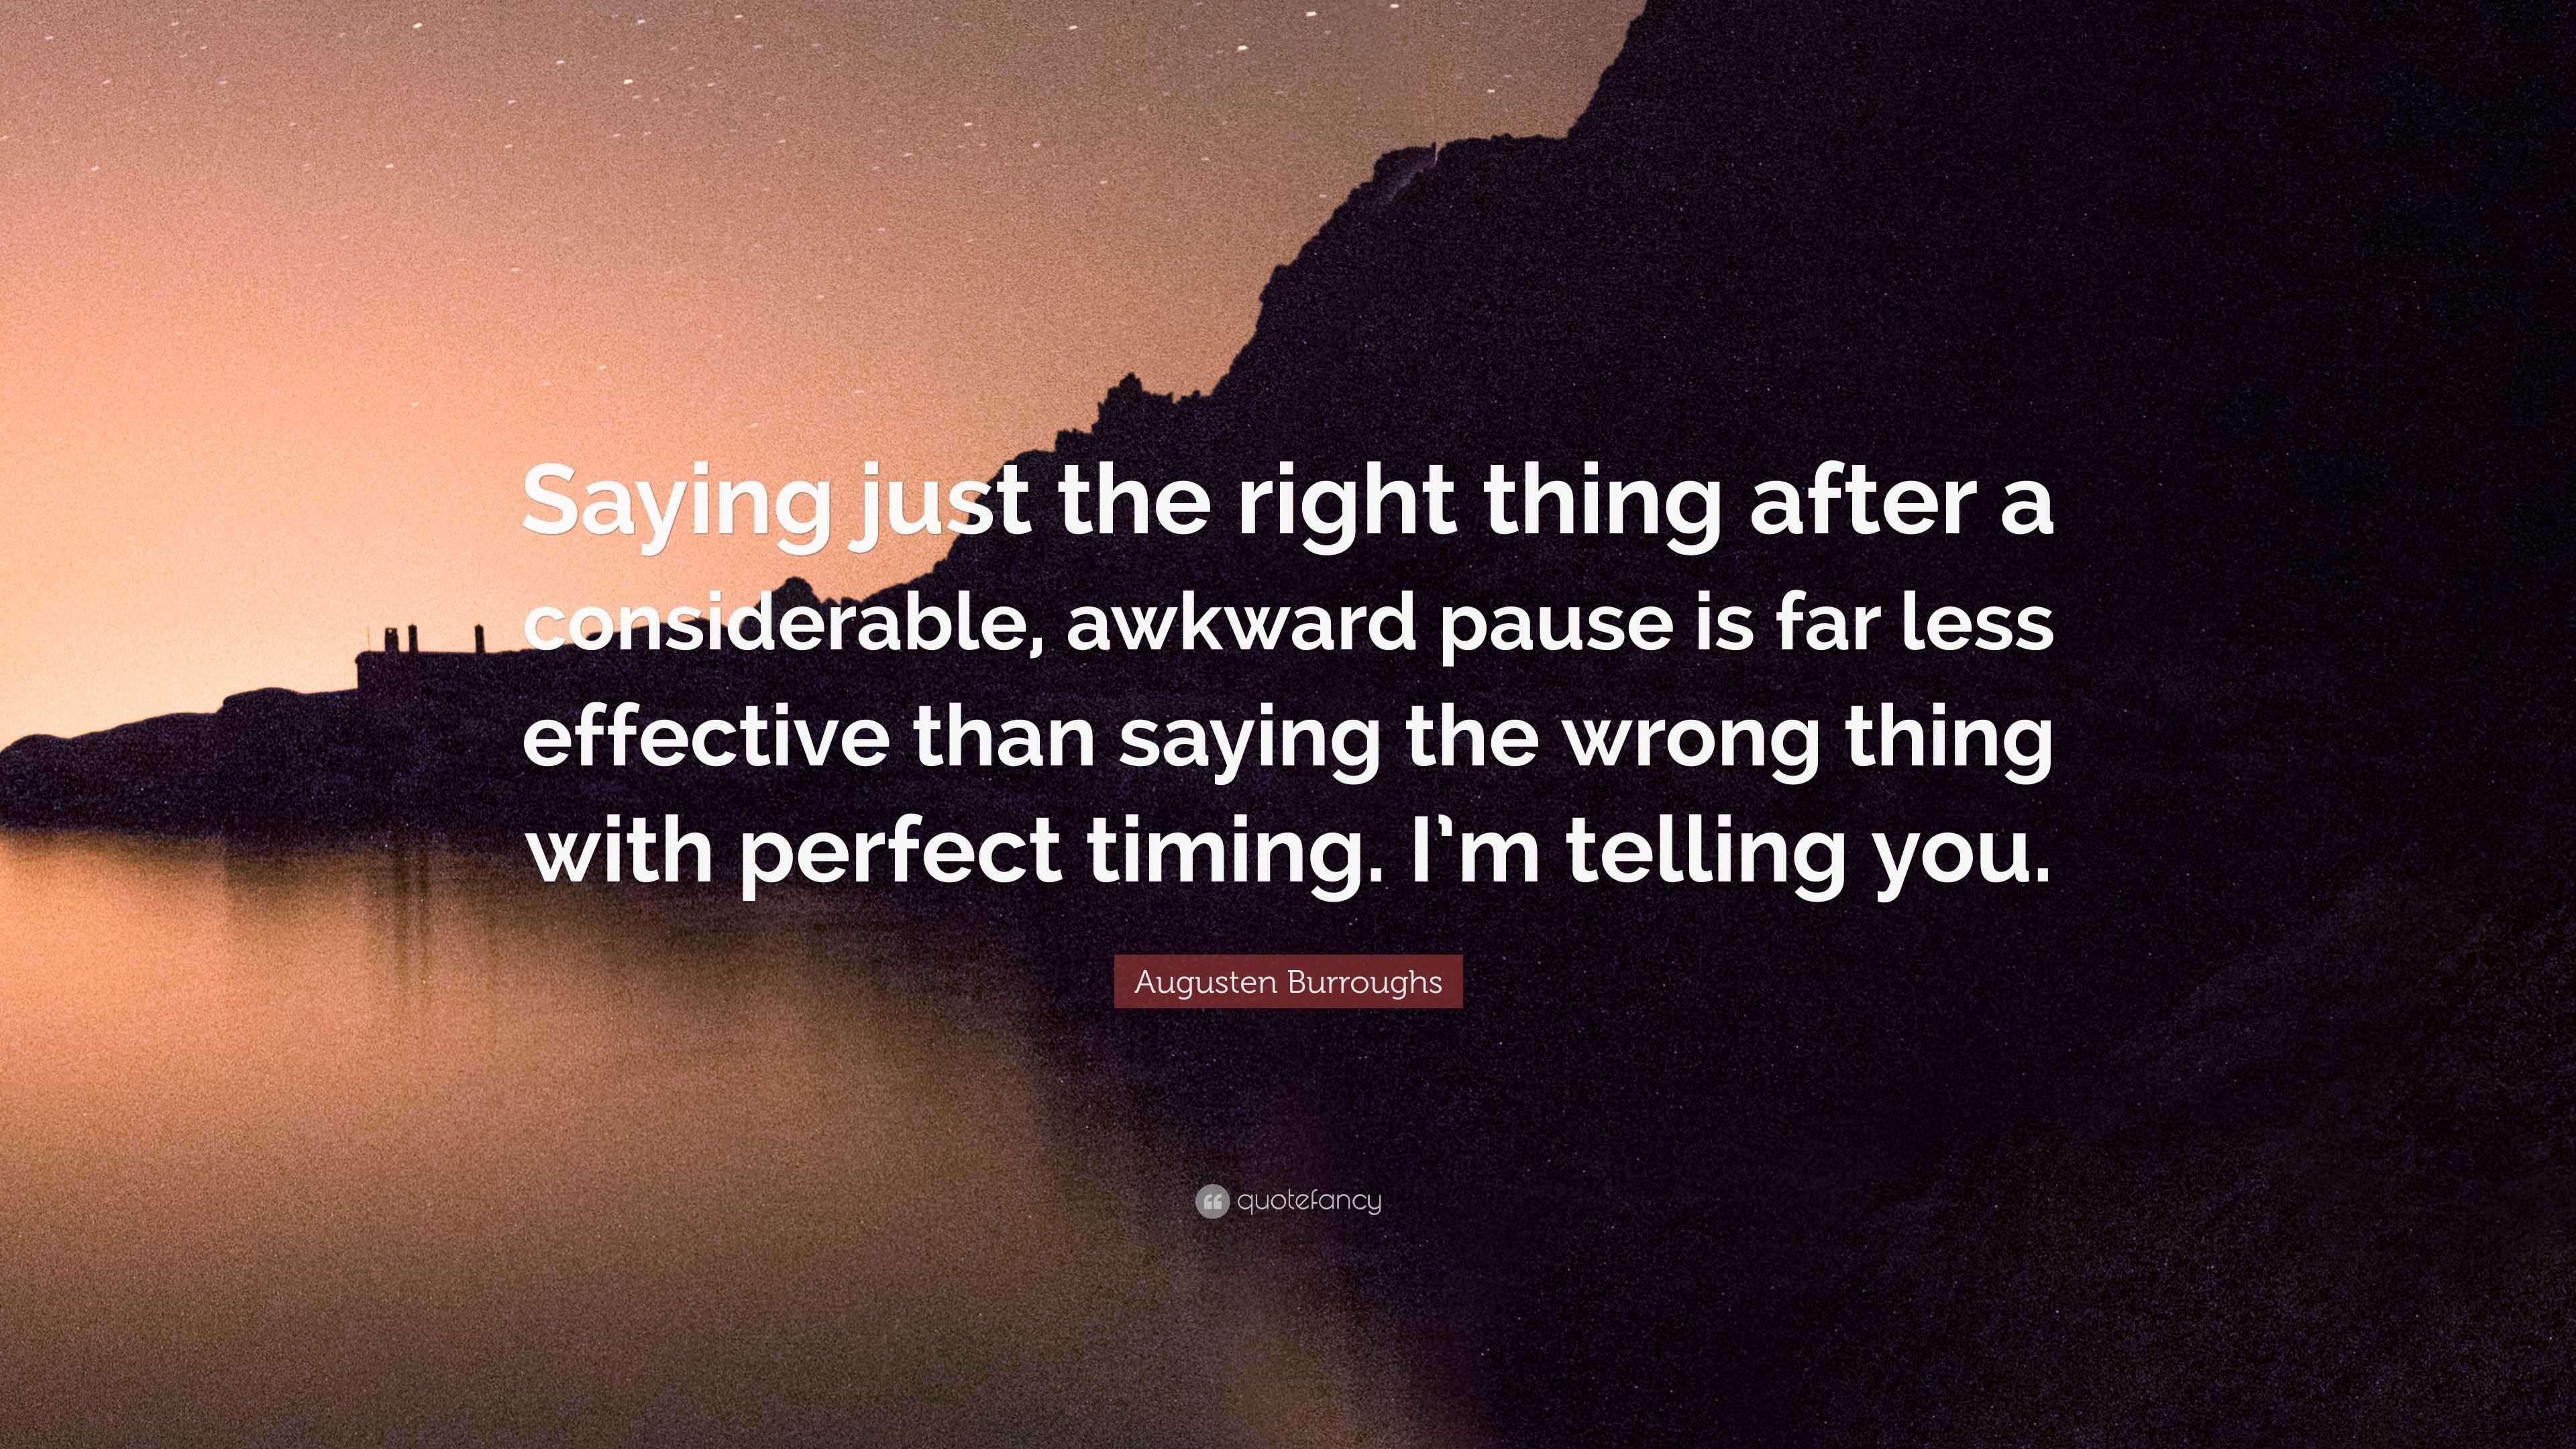 Augusten Burroughs Quote Saying Just The Right Thing After A Images, Photos, Reviews